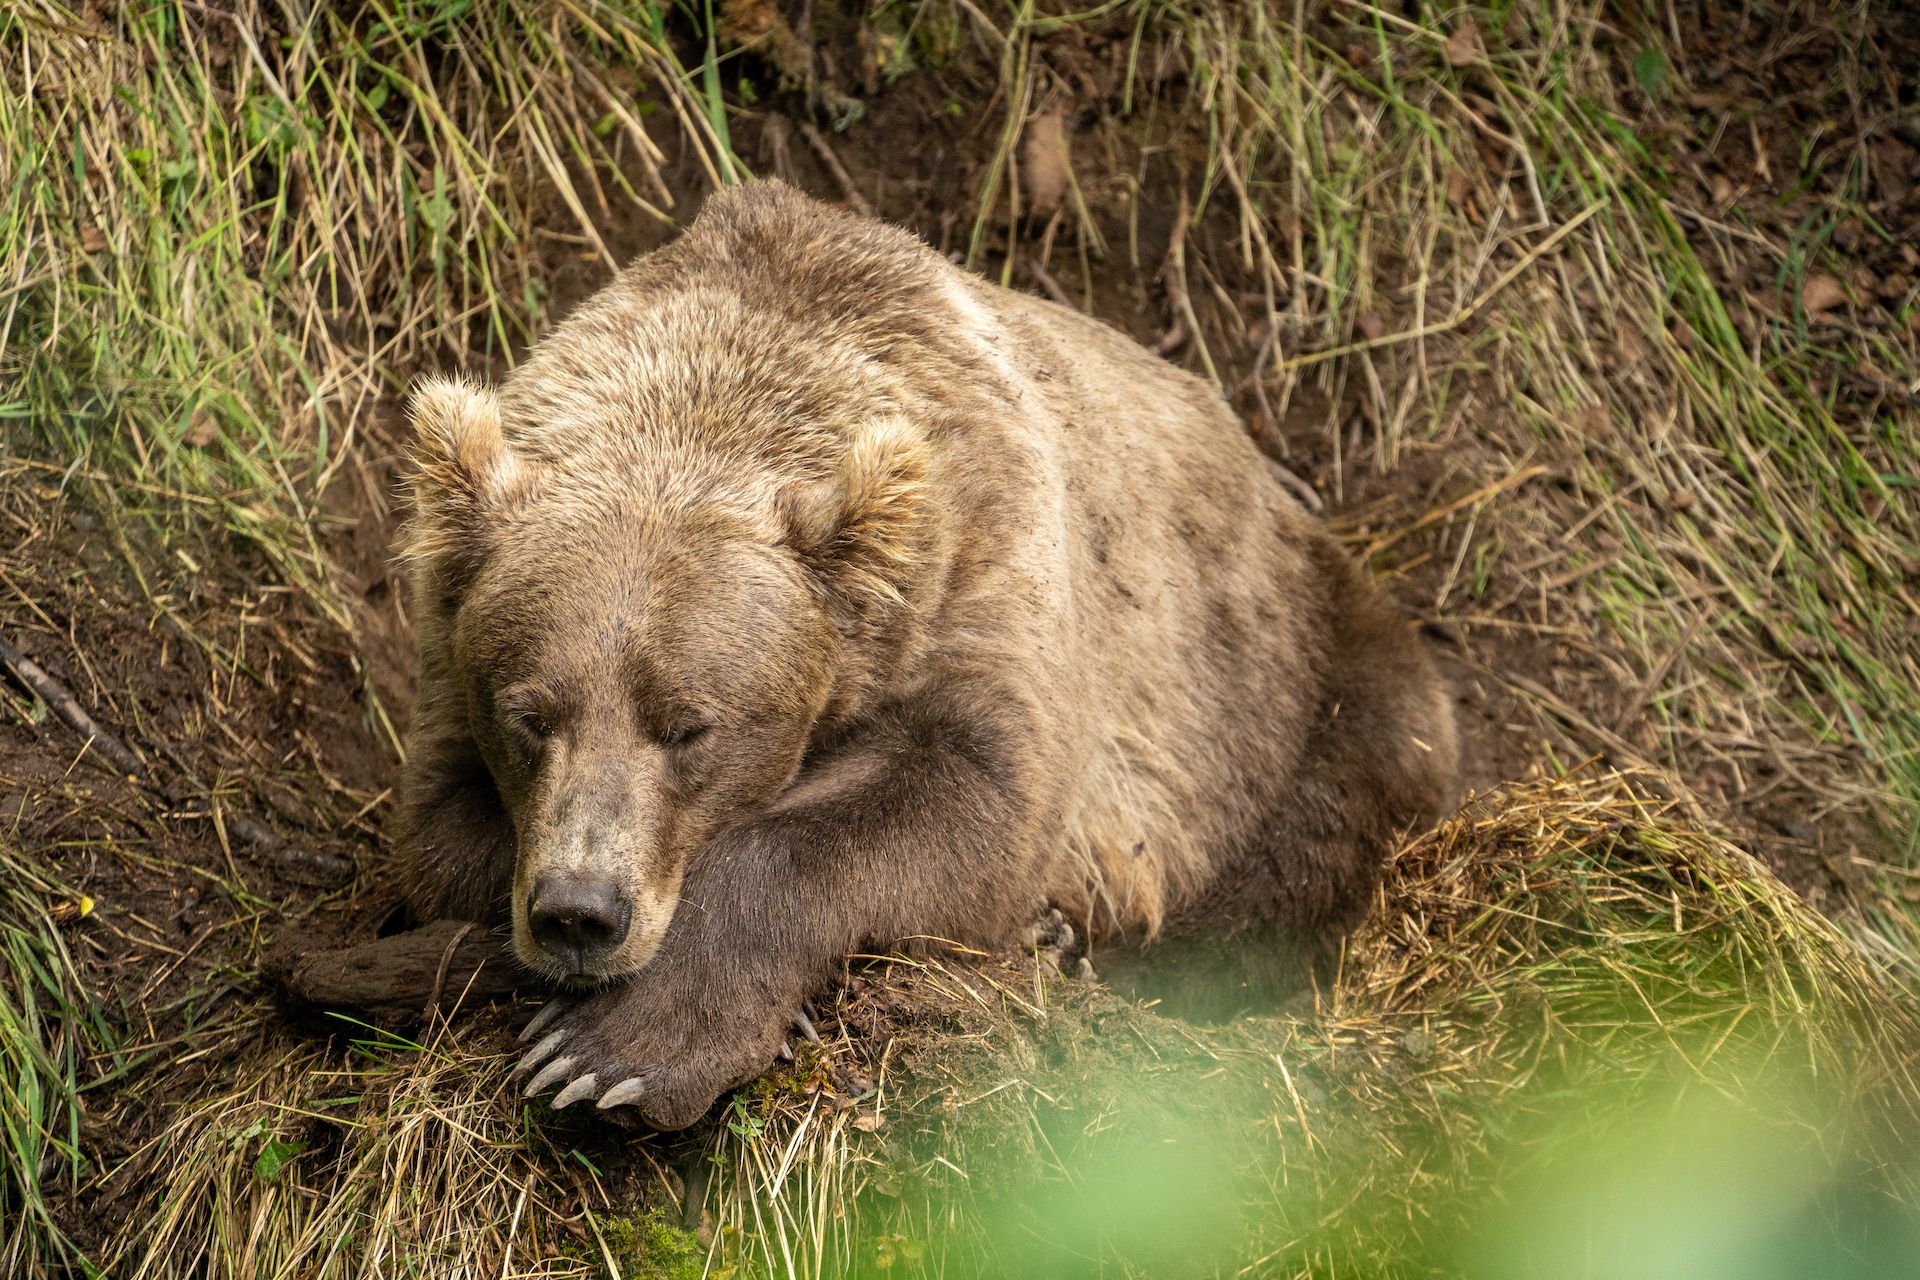 After feeding, some bears go into the nearby forest to nap on their luxuous mud and grass pad